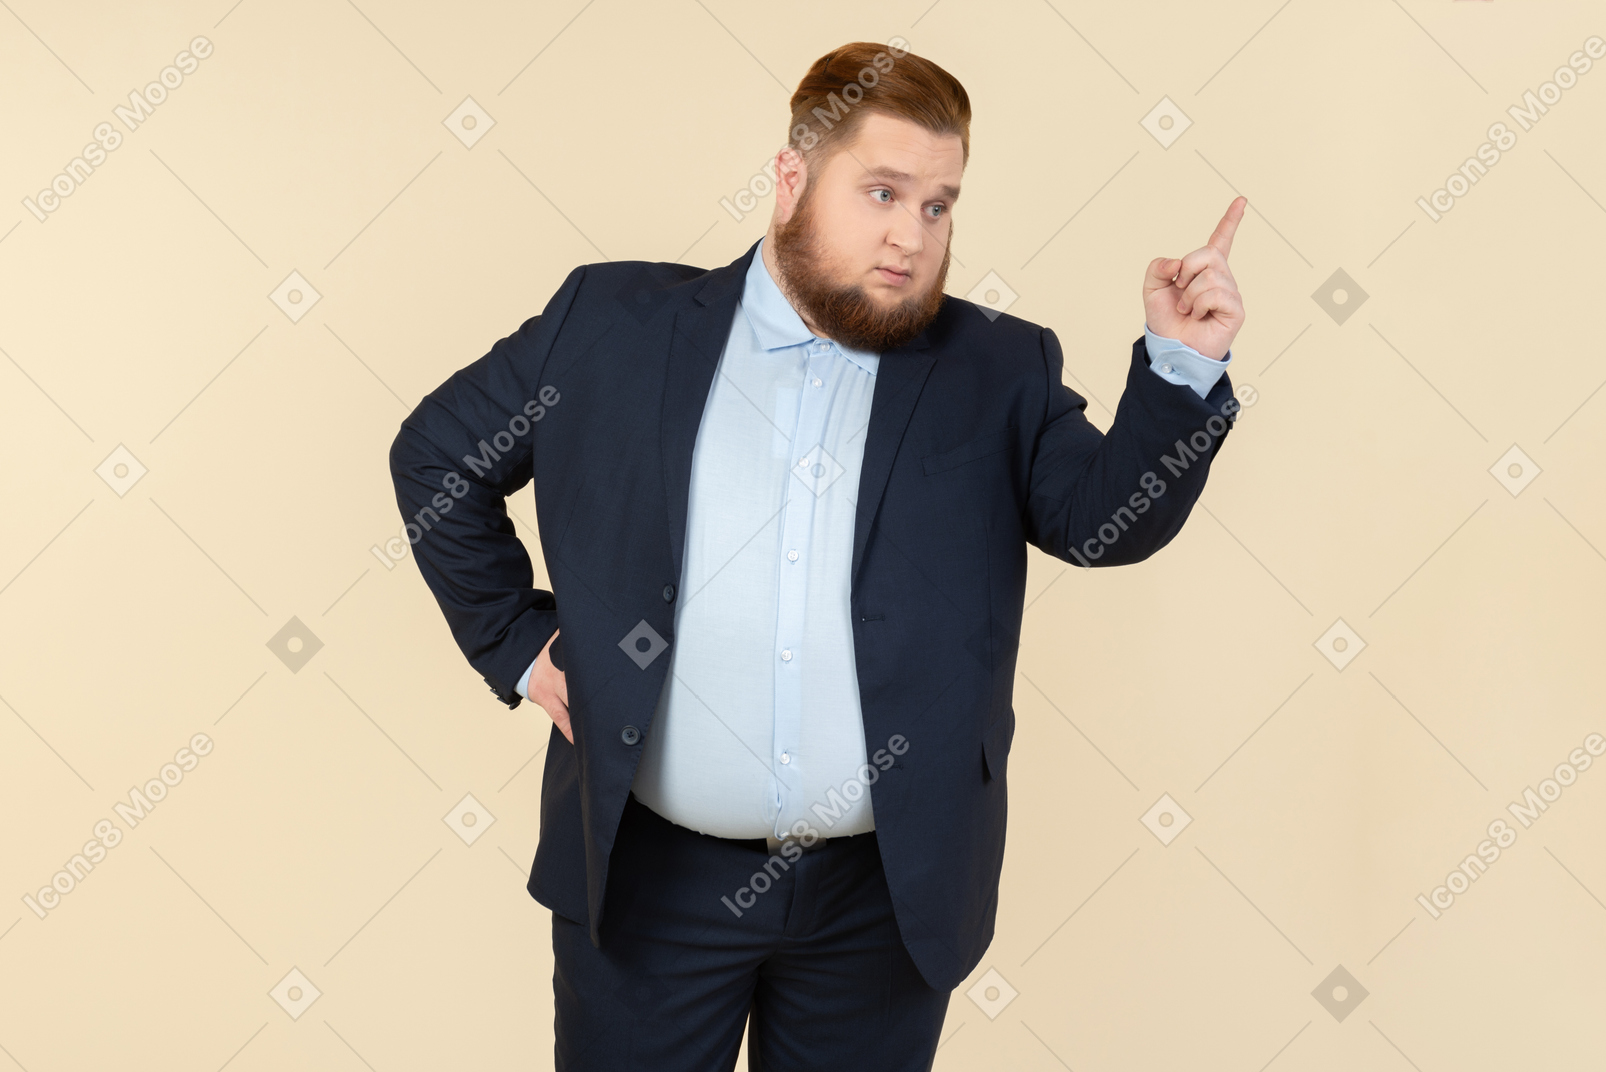 Severe looking young overweight man in suit pointing up